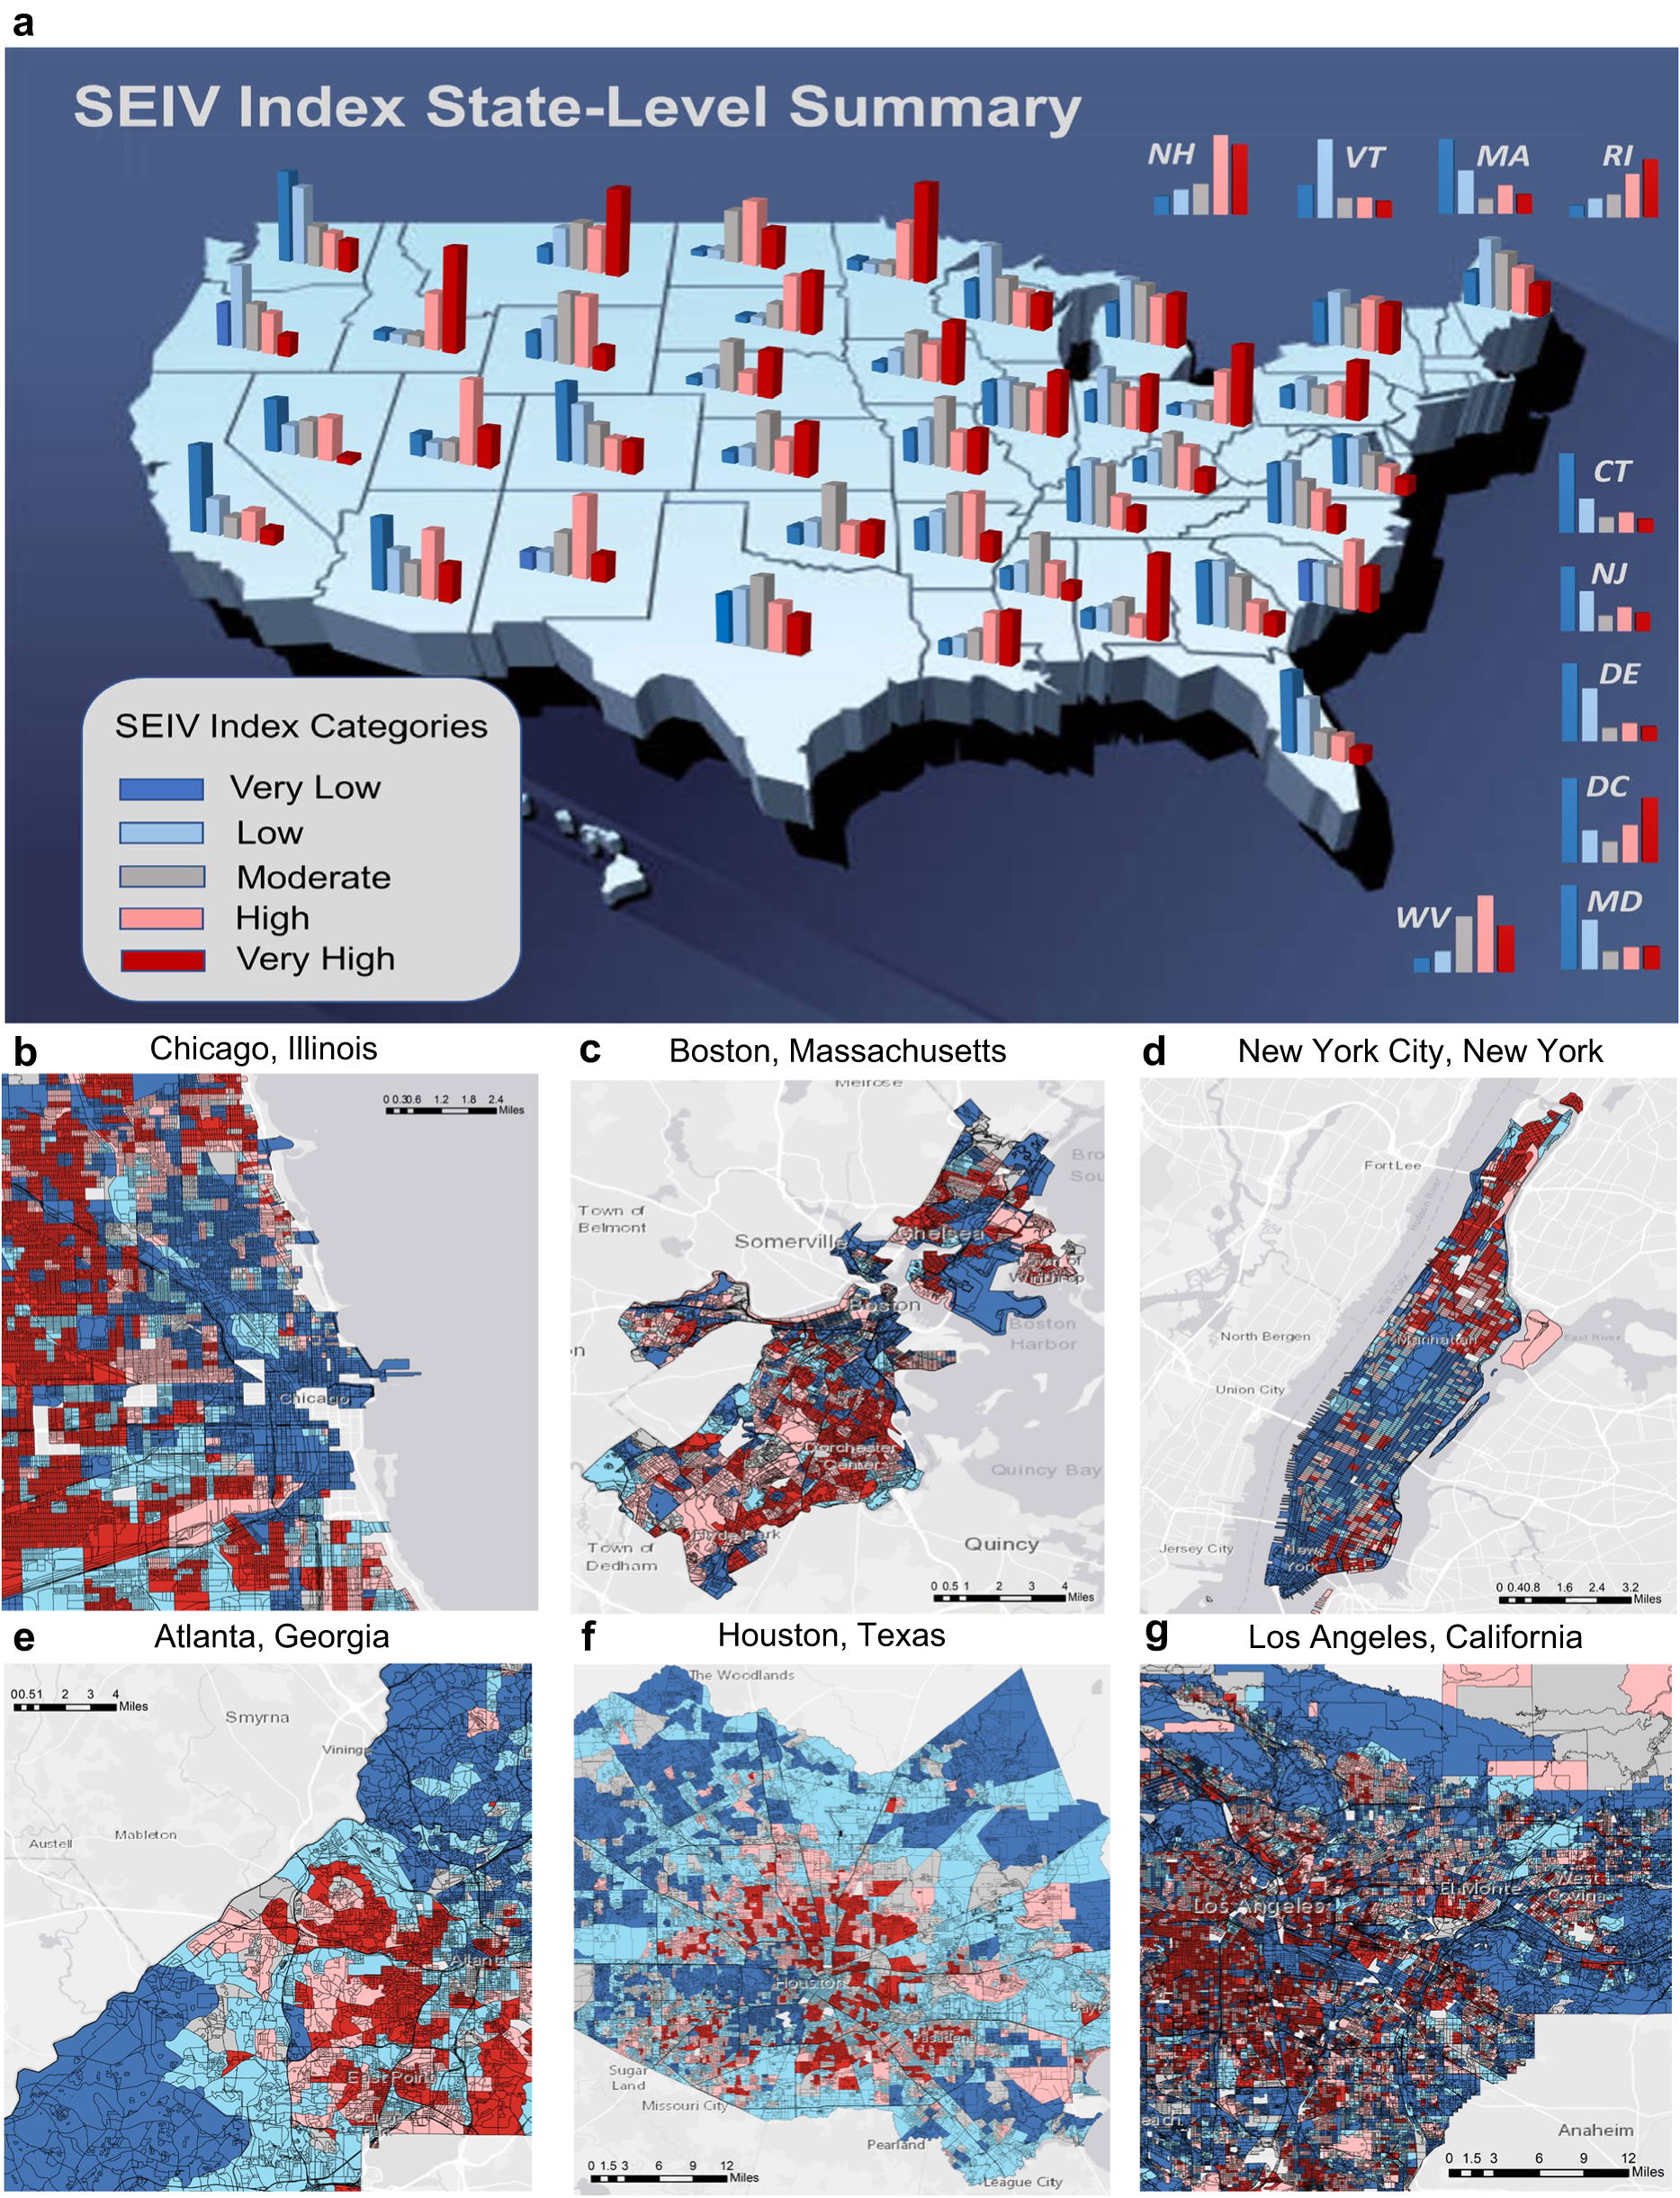 Block-level vulnerability assessment reveals disproportionate impacts of  natural hazards across the conterminous United States